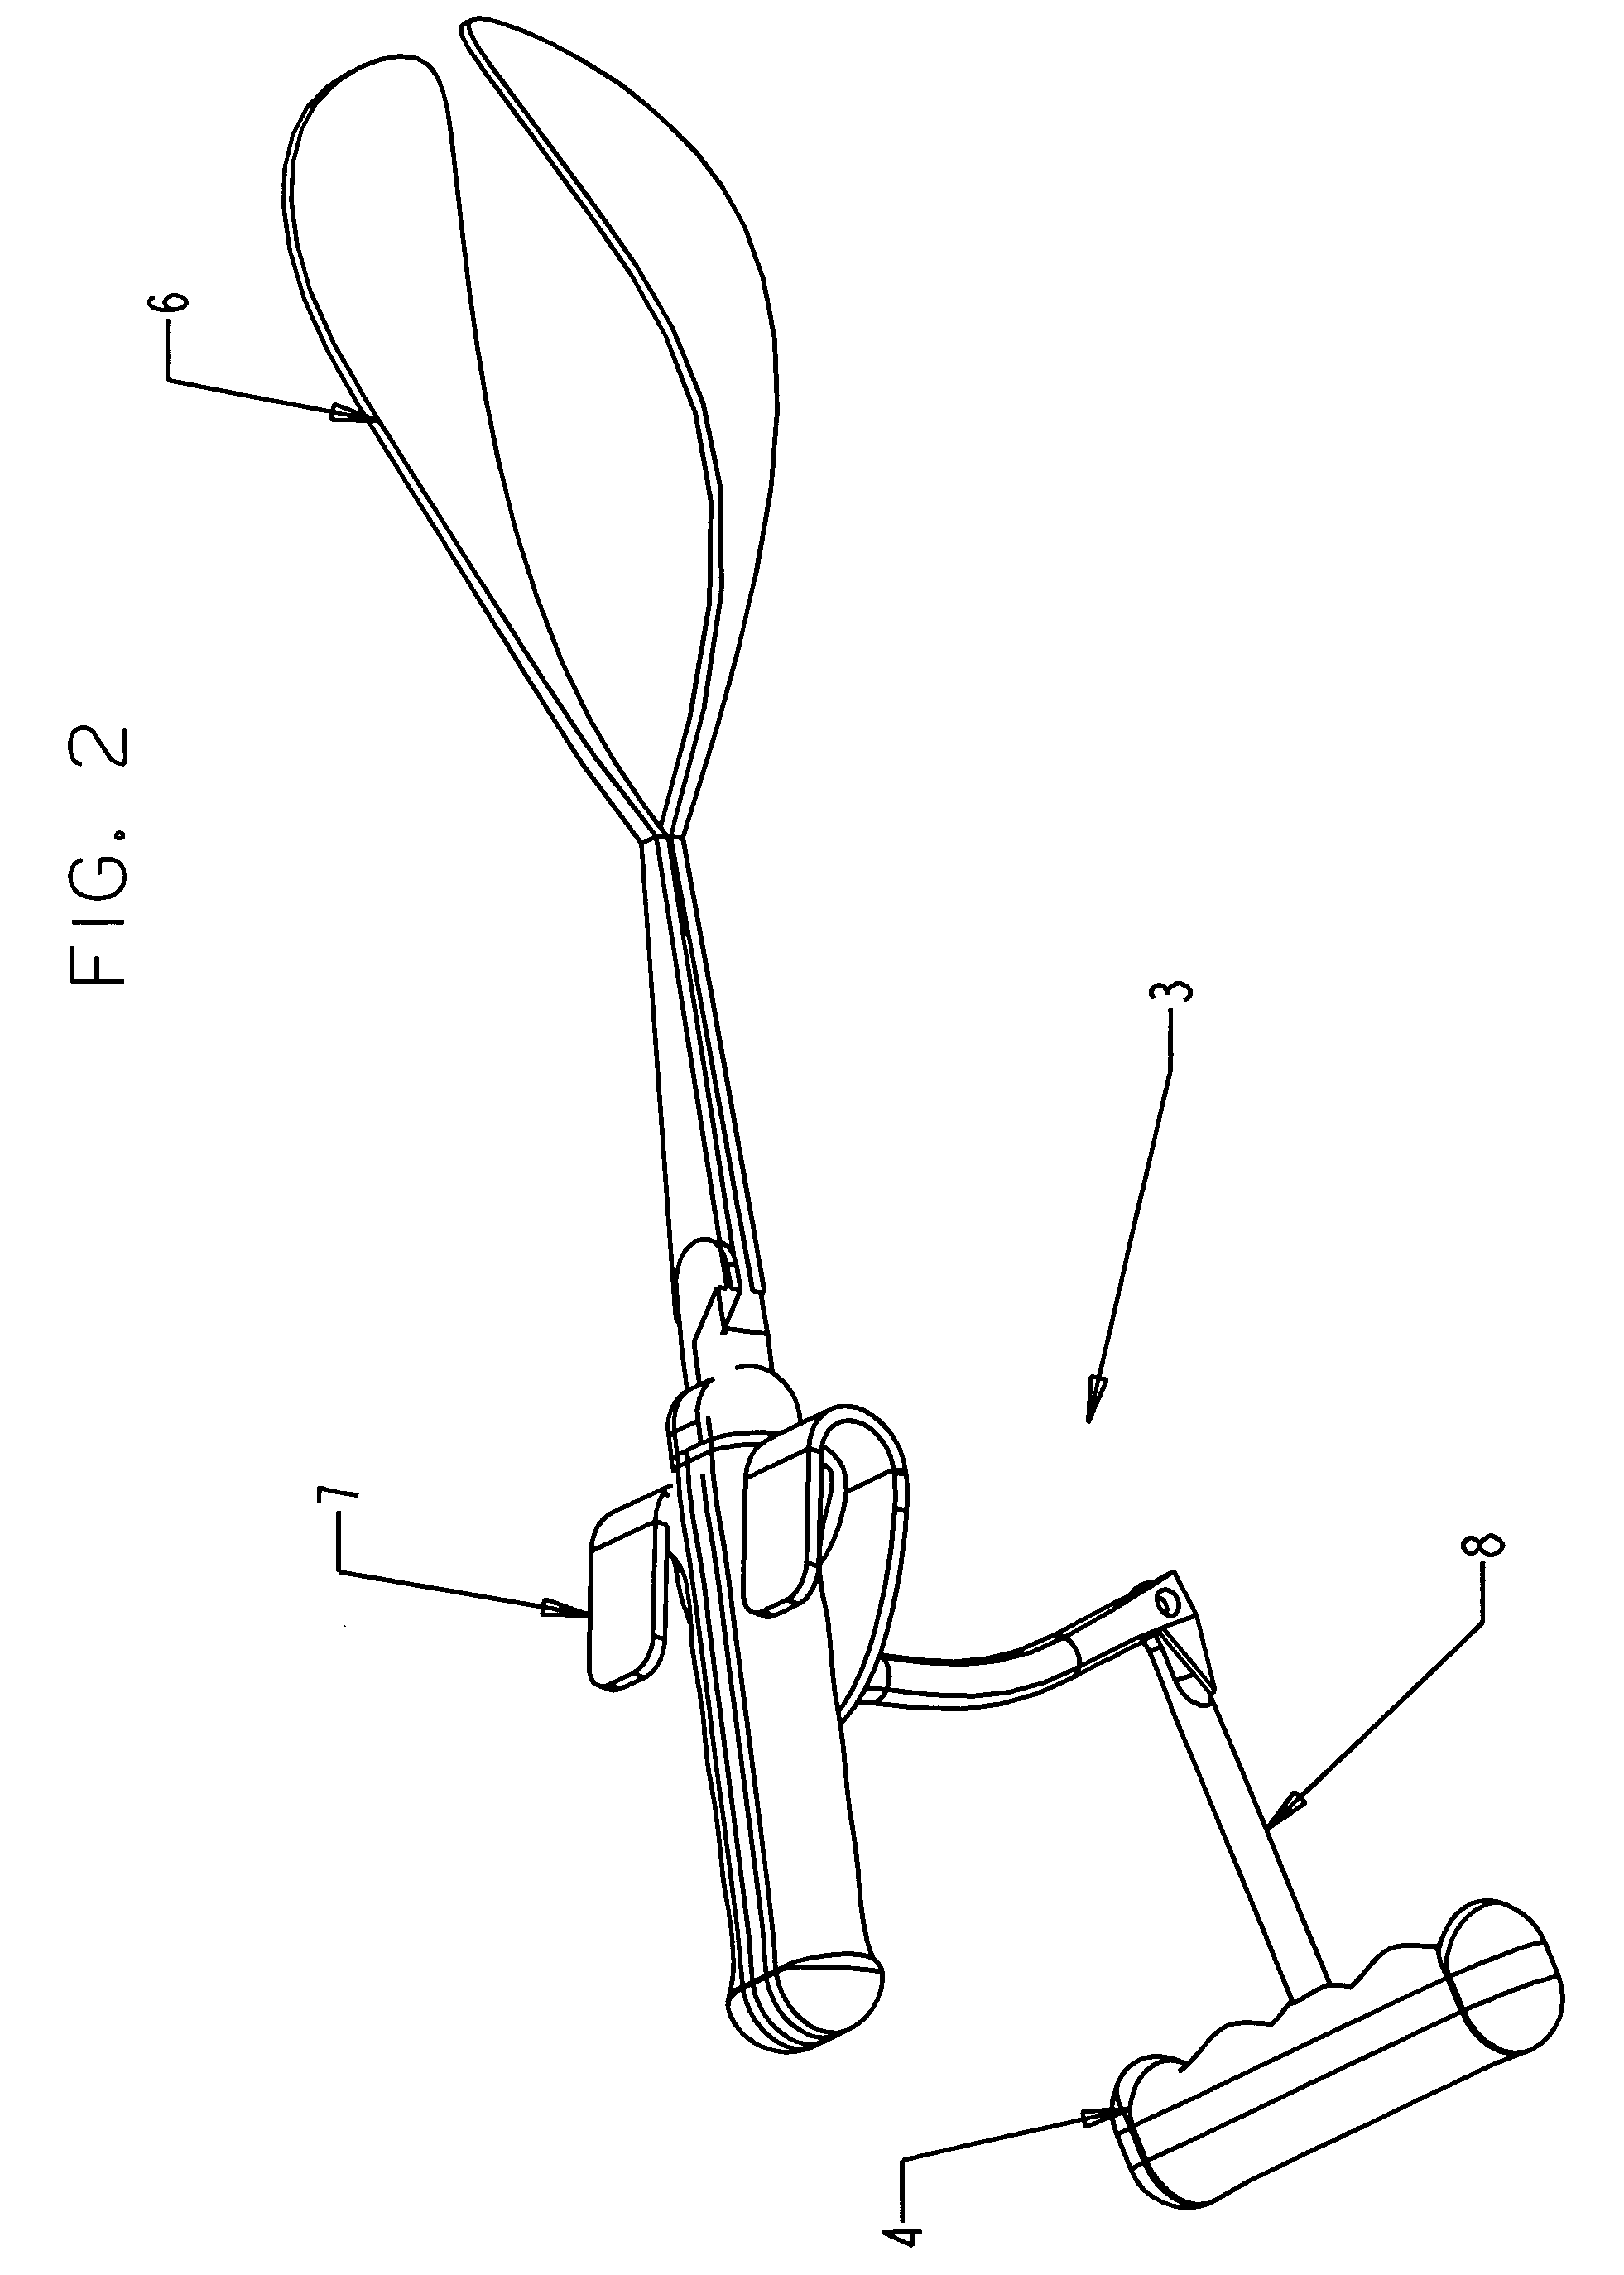 Axis-traction handle with a pull-sensing grip for the obstetrical forceps